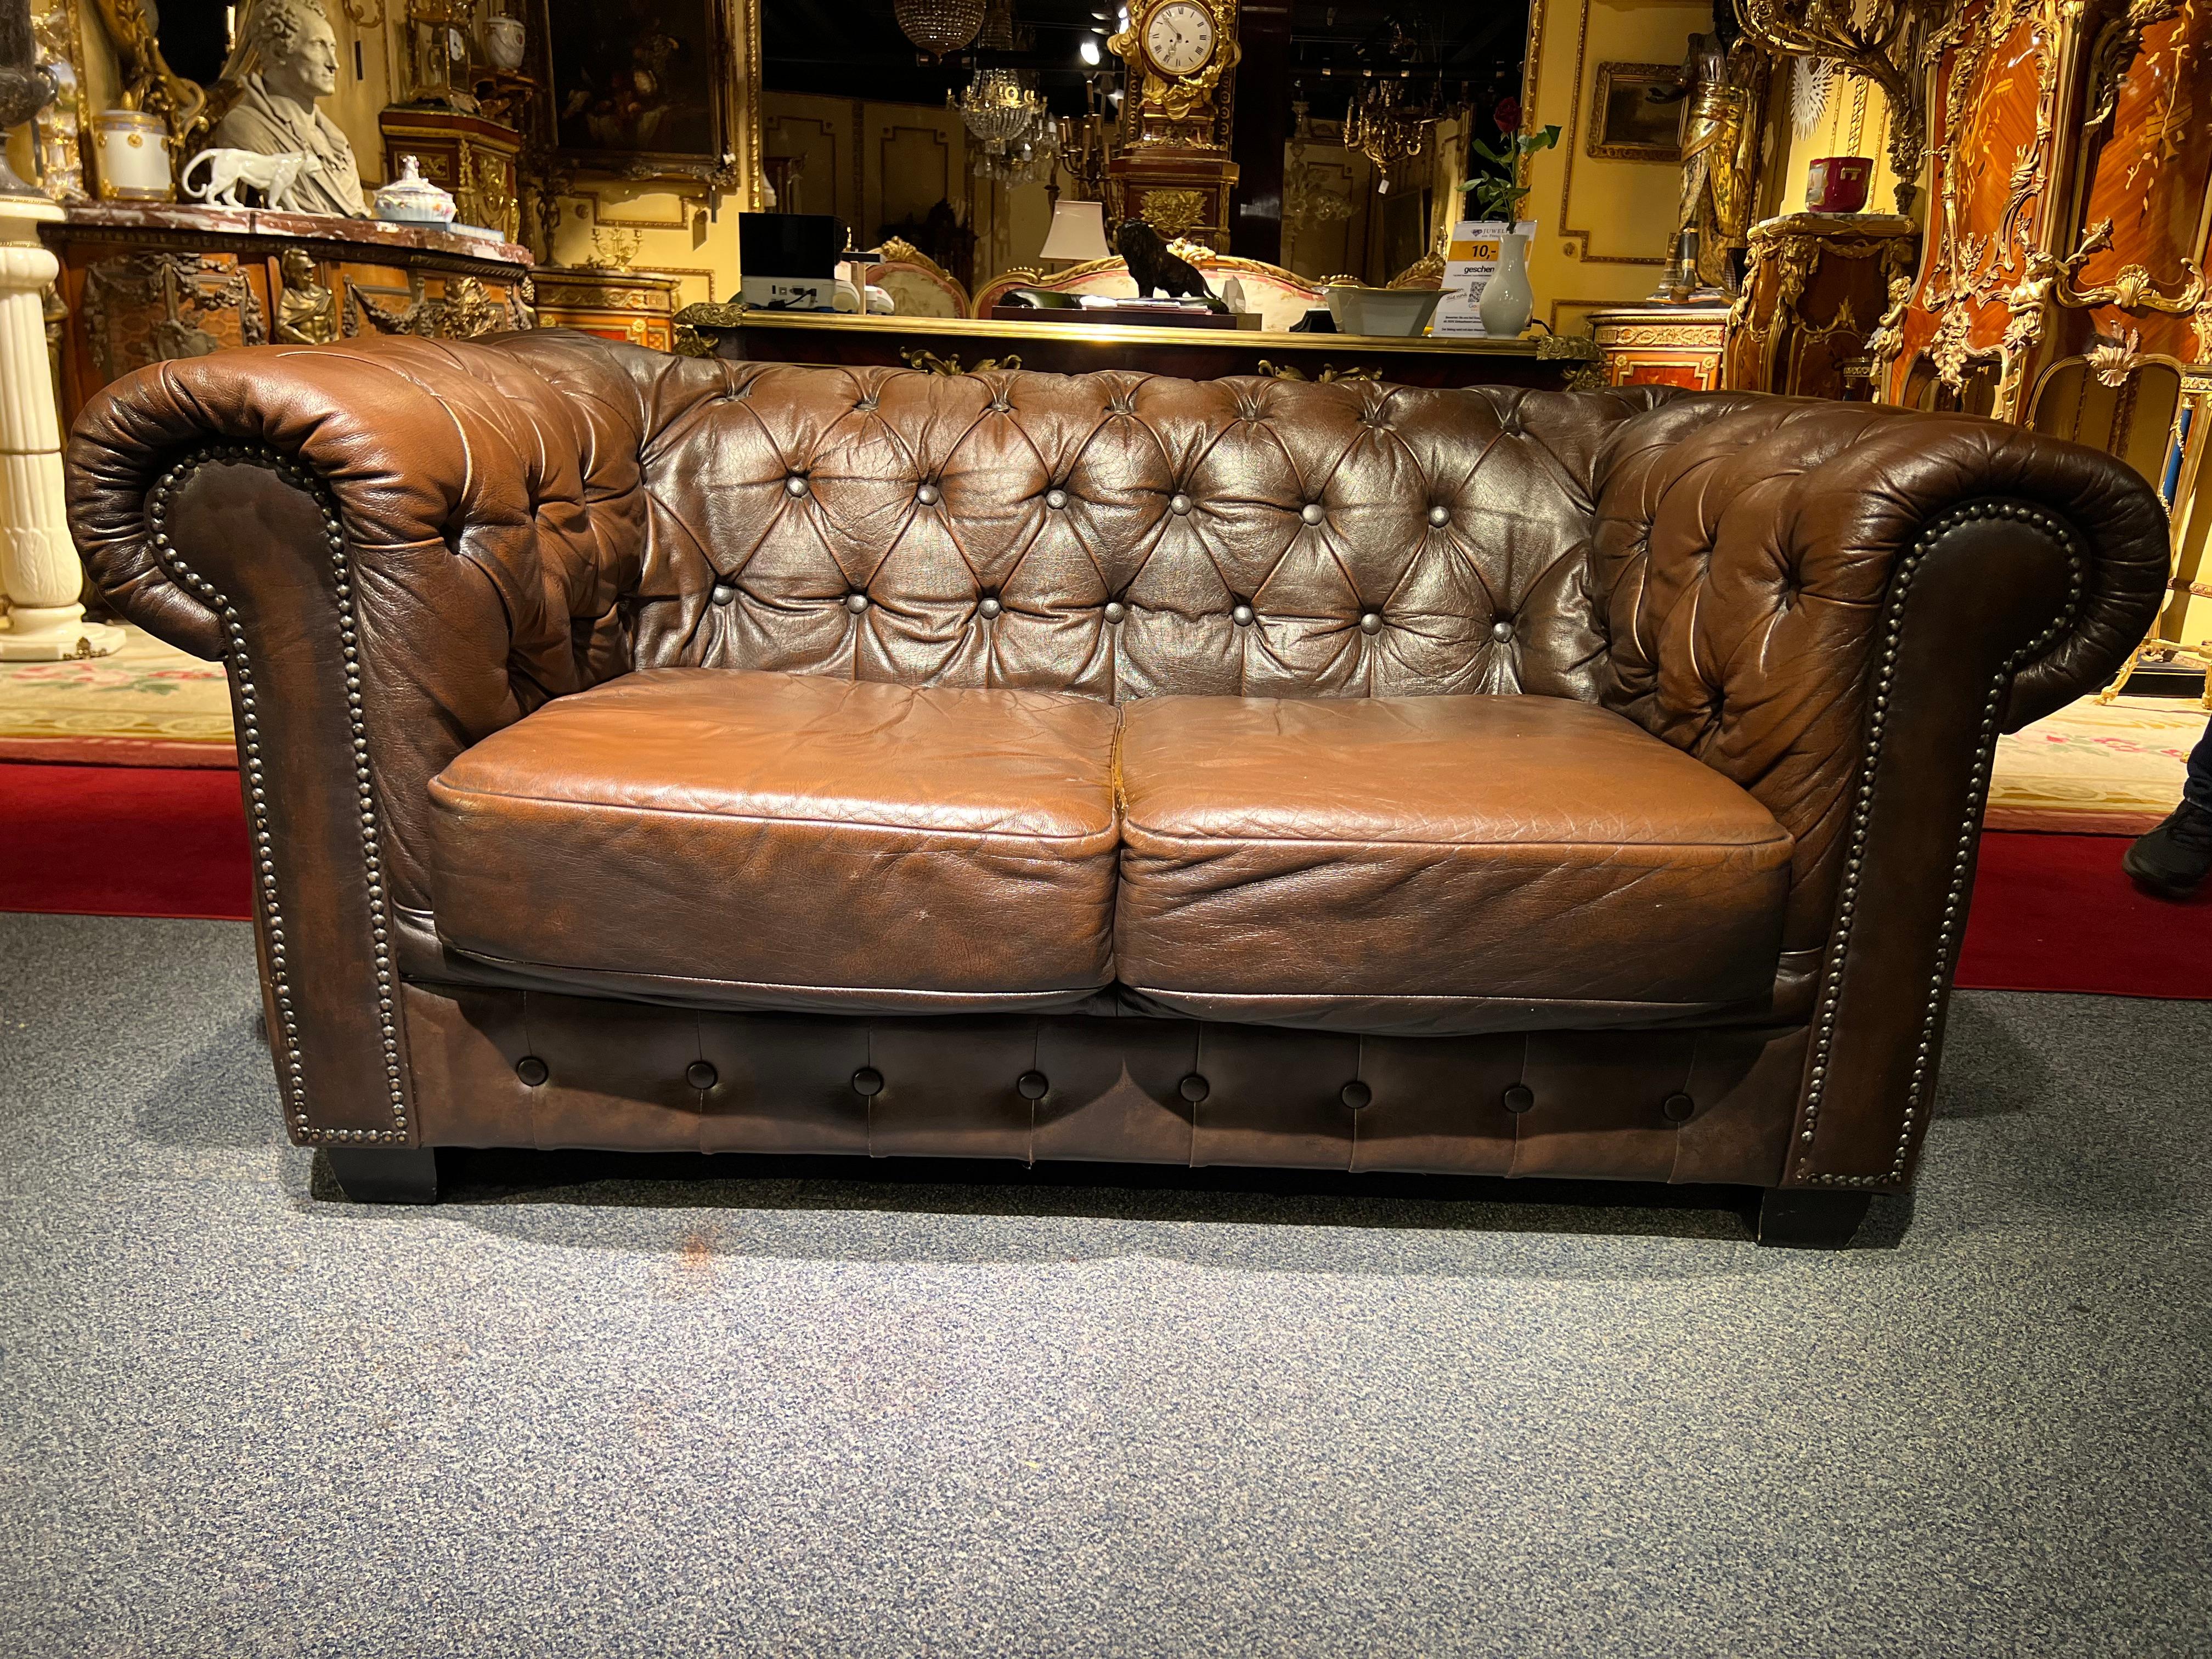 We are delighted to offer this stunning rare handmade in England brown leather two-seat Sofa. Where to begin! This sofa is absolute eye candy from every angle, it has the original leather hide, it has been hand dyed this lovely and bespoke brown